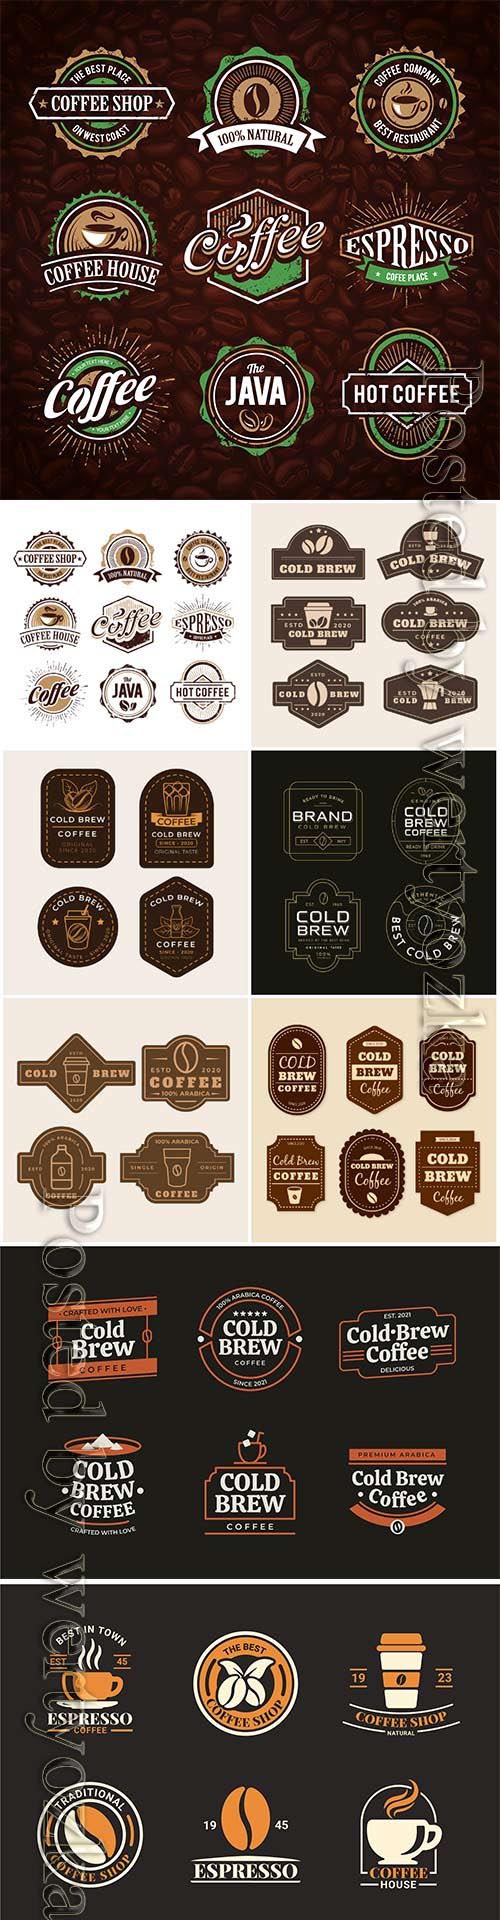 Cold brew coffee labels » Heroturko - Graphic Resources